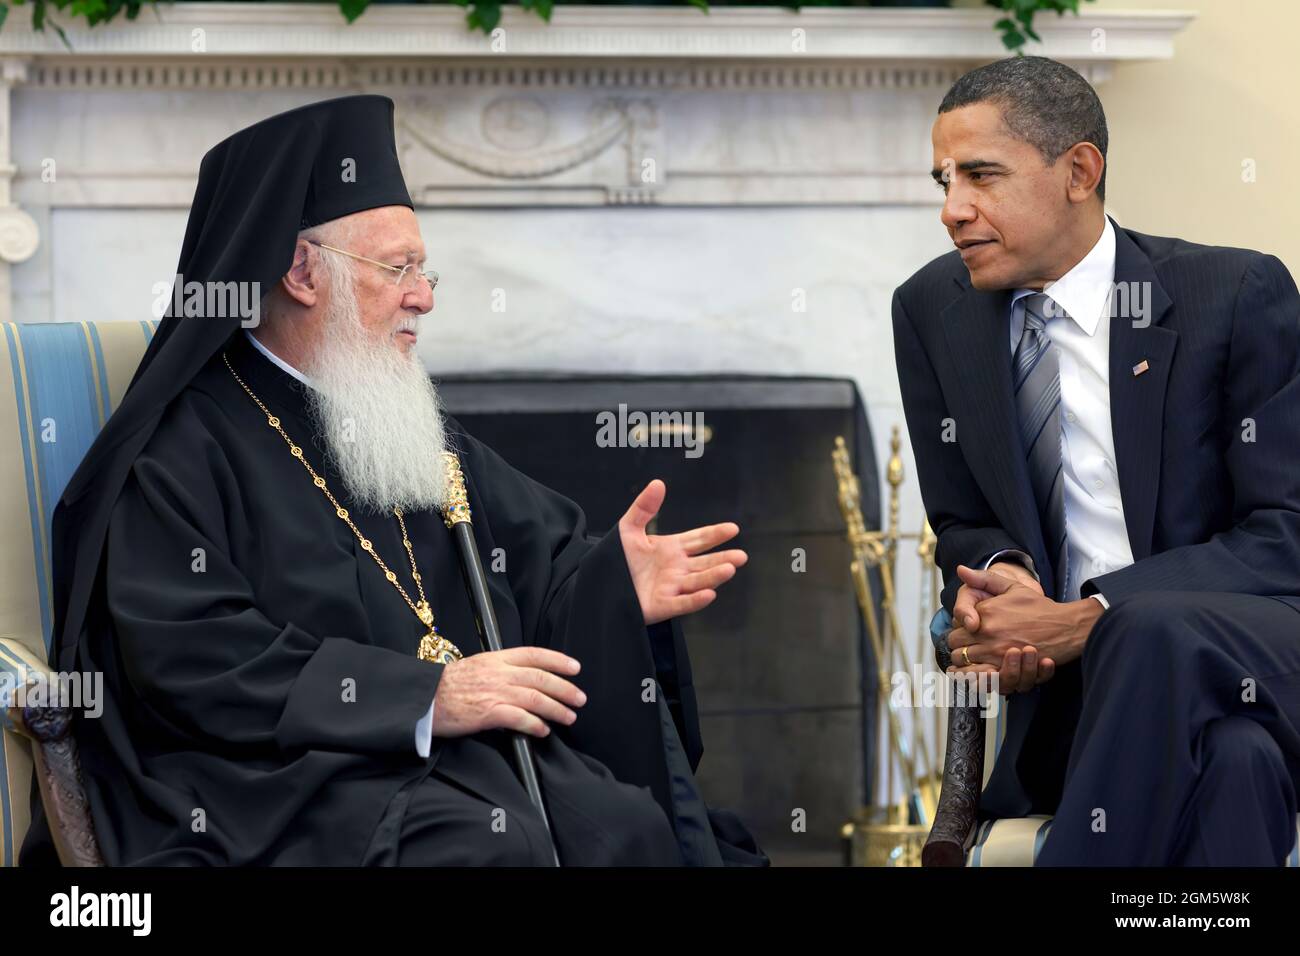 President Barack Obama meets with His All Holiness Ecumenical Patriarch Bartholomew in the Oval Office, Nov. 3, 2009. (Official White House Photo by Pete Souza) Stock Photo